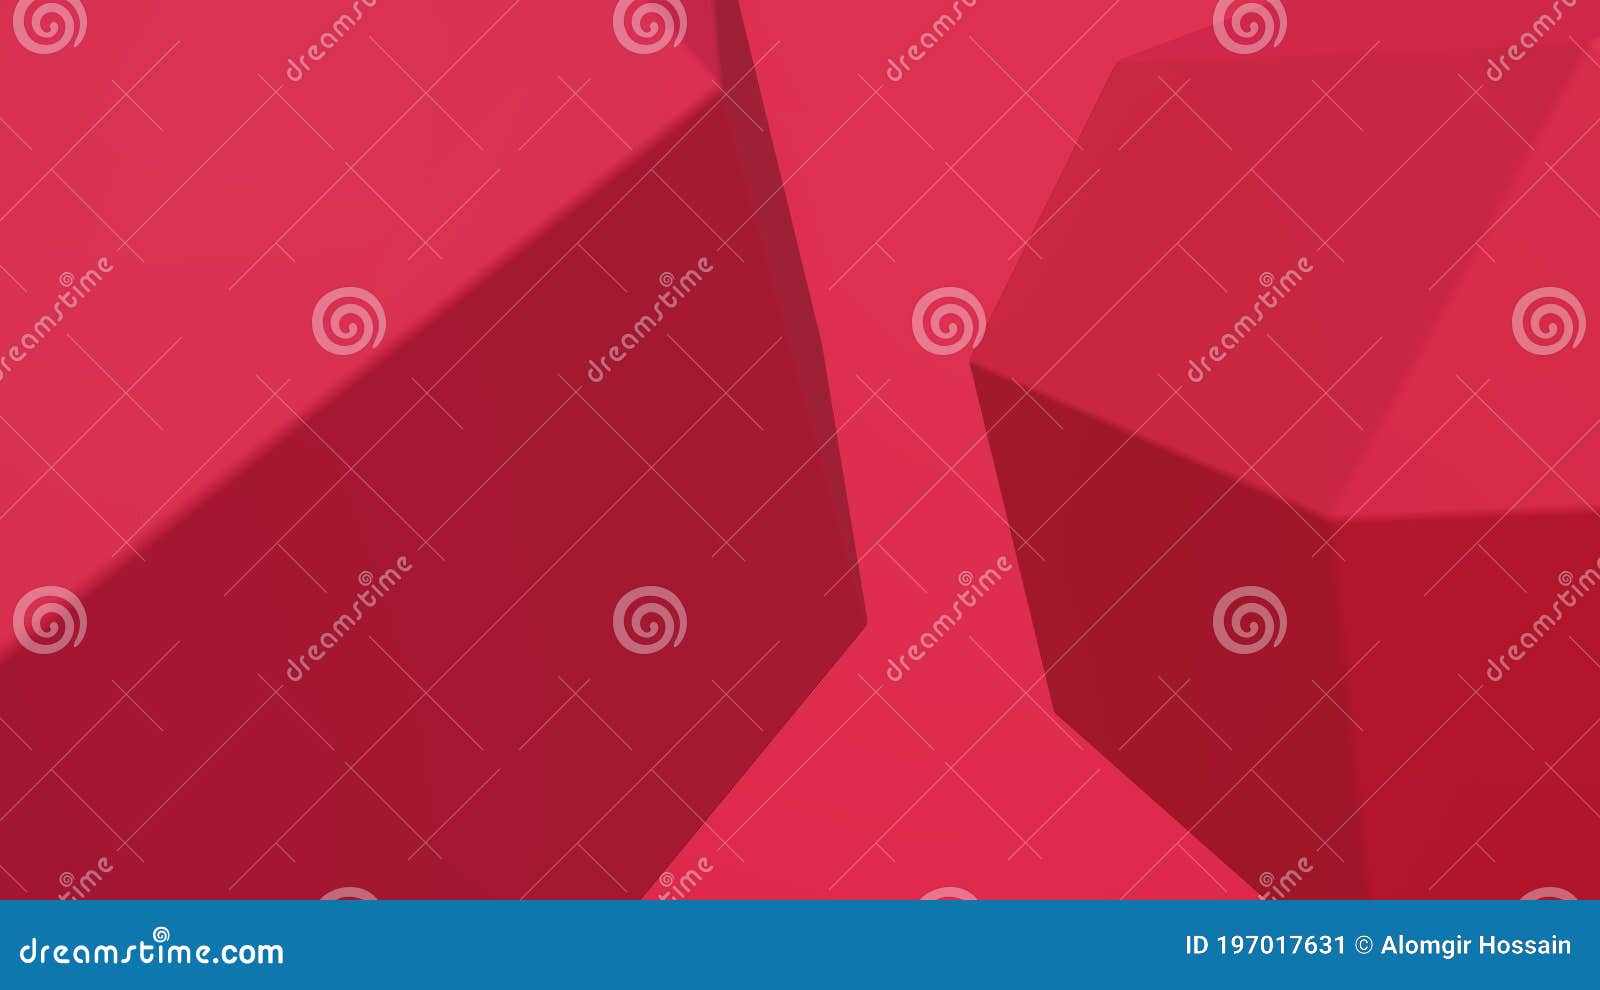 pink geometric s background , abstract 3d rendering